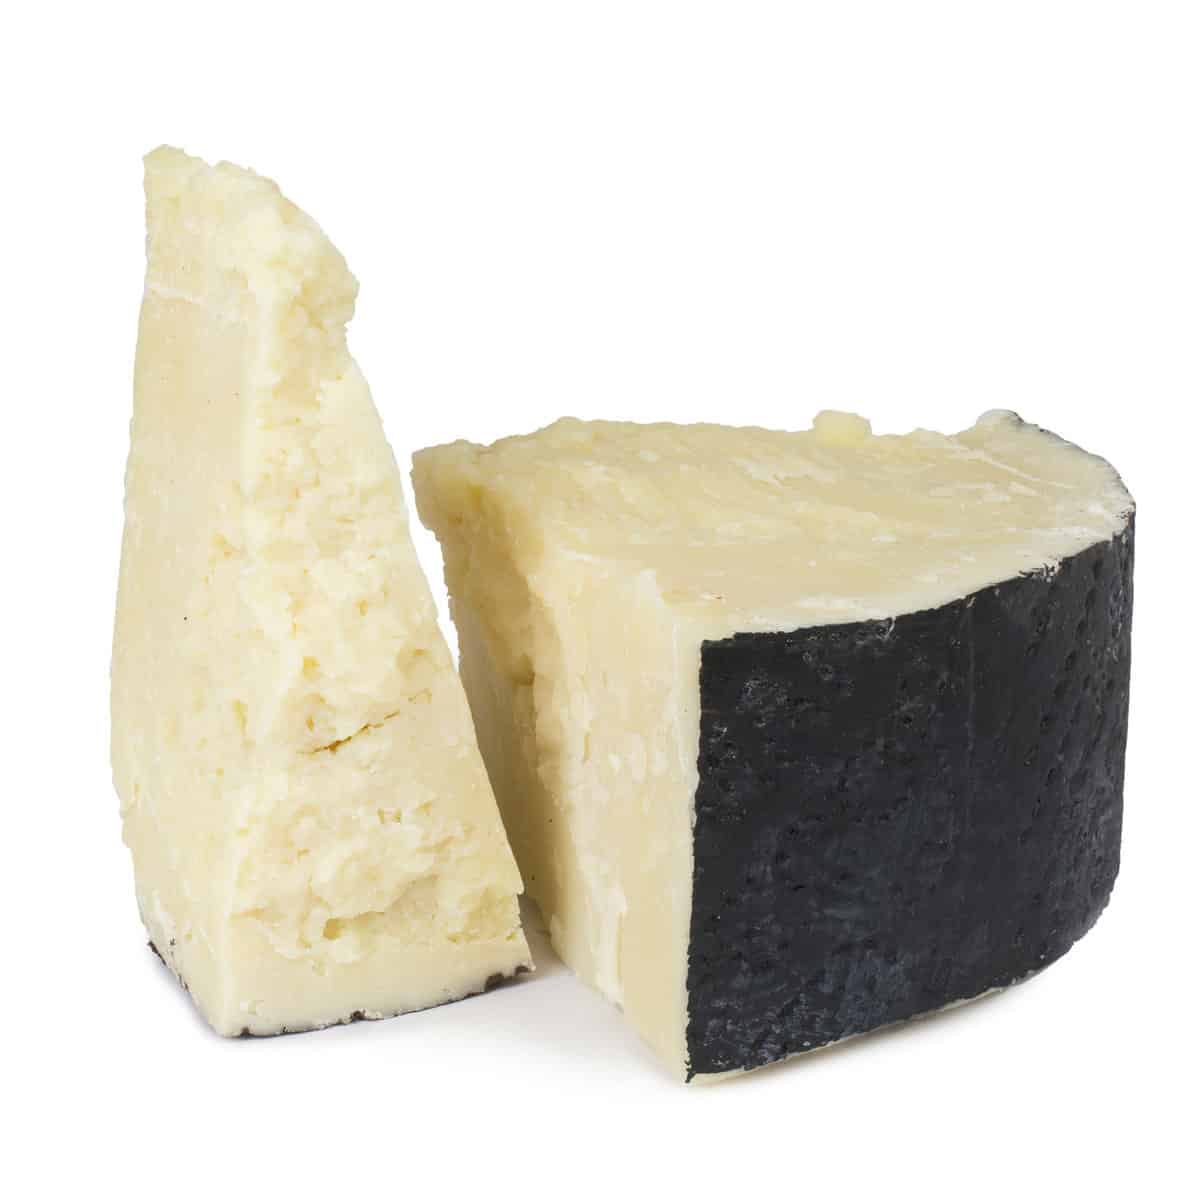 Two chunks of percorino cheese as a manchego cheese substitutes.